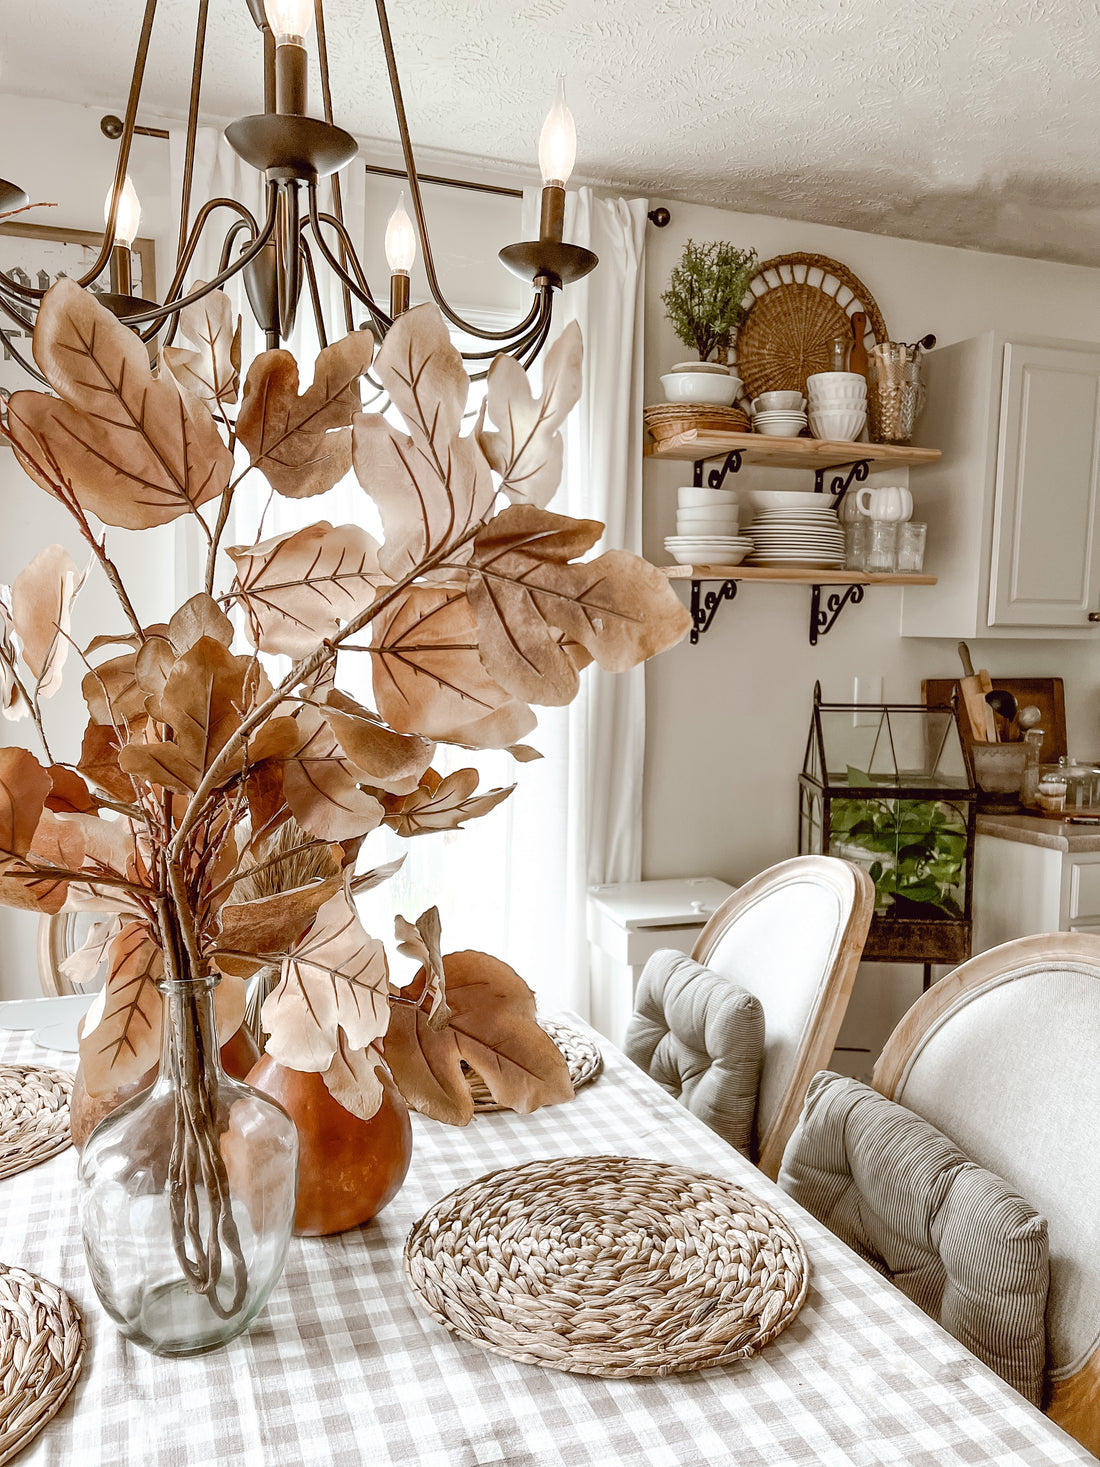 Practical Tips to Use When Decorating Your Fall Cottage Home